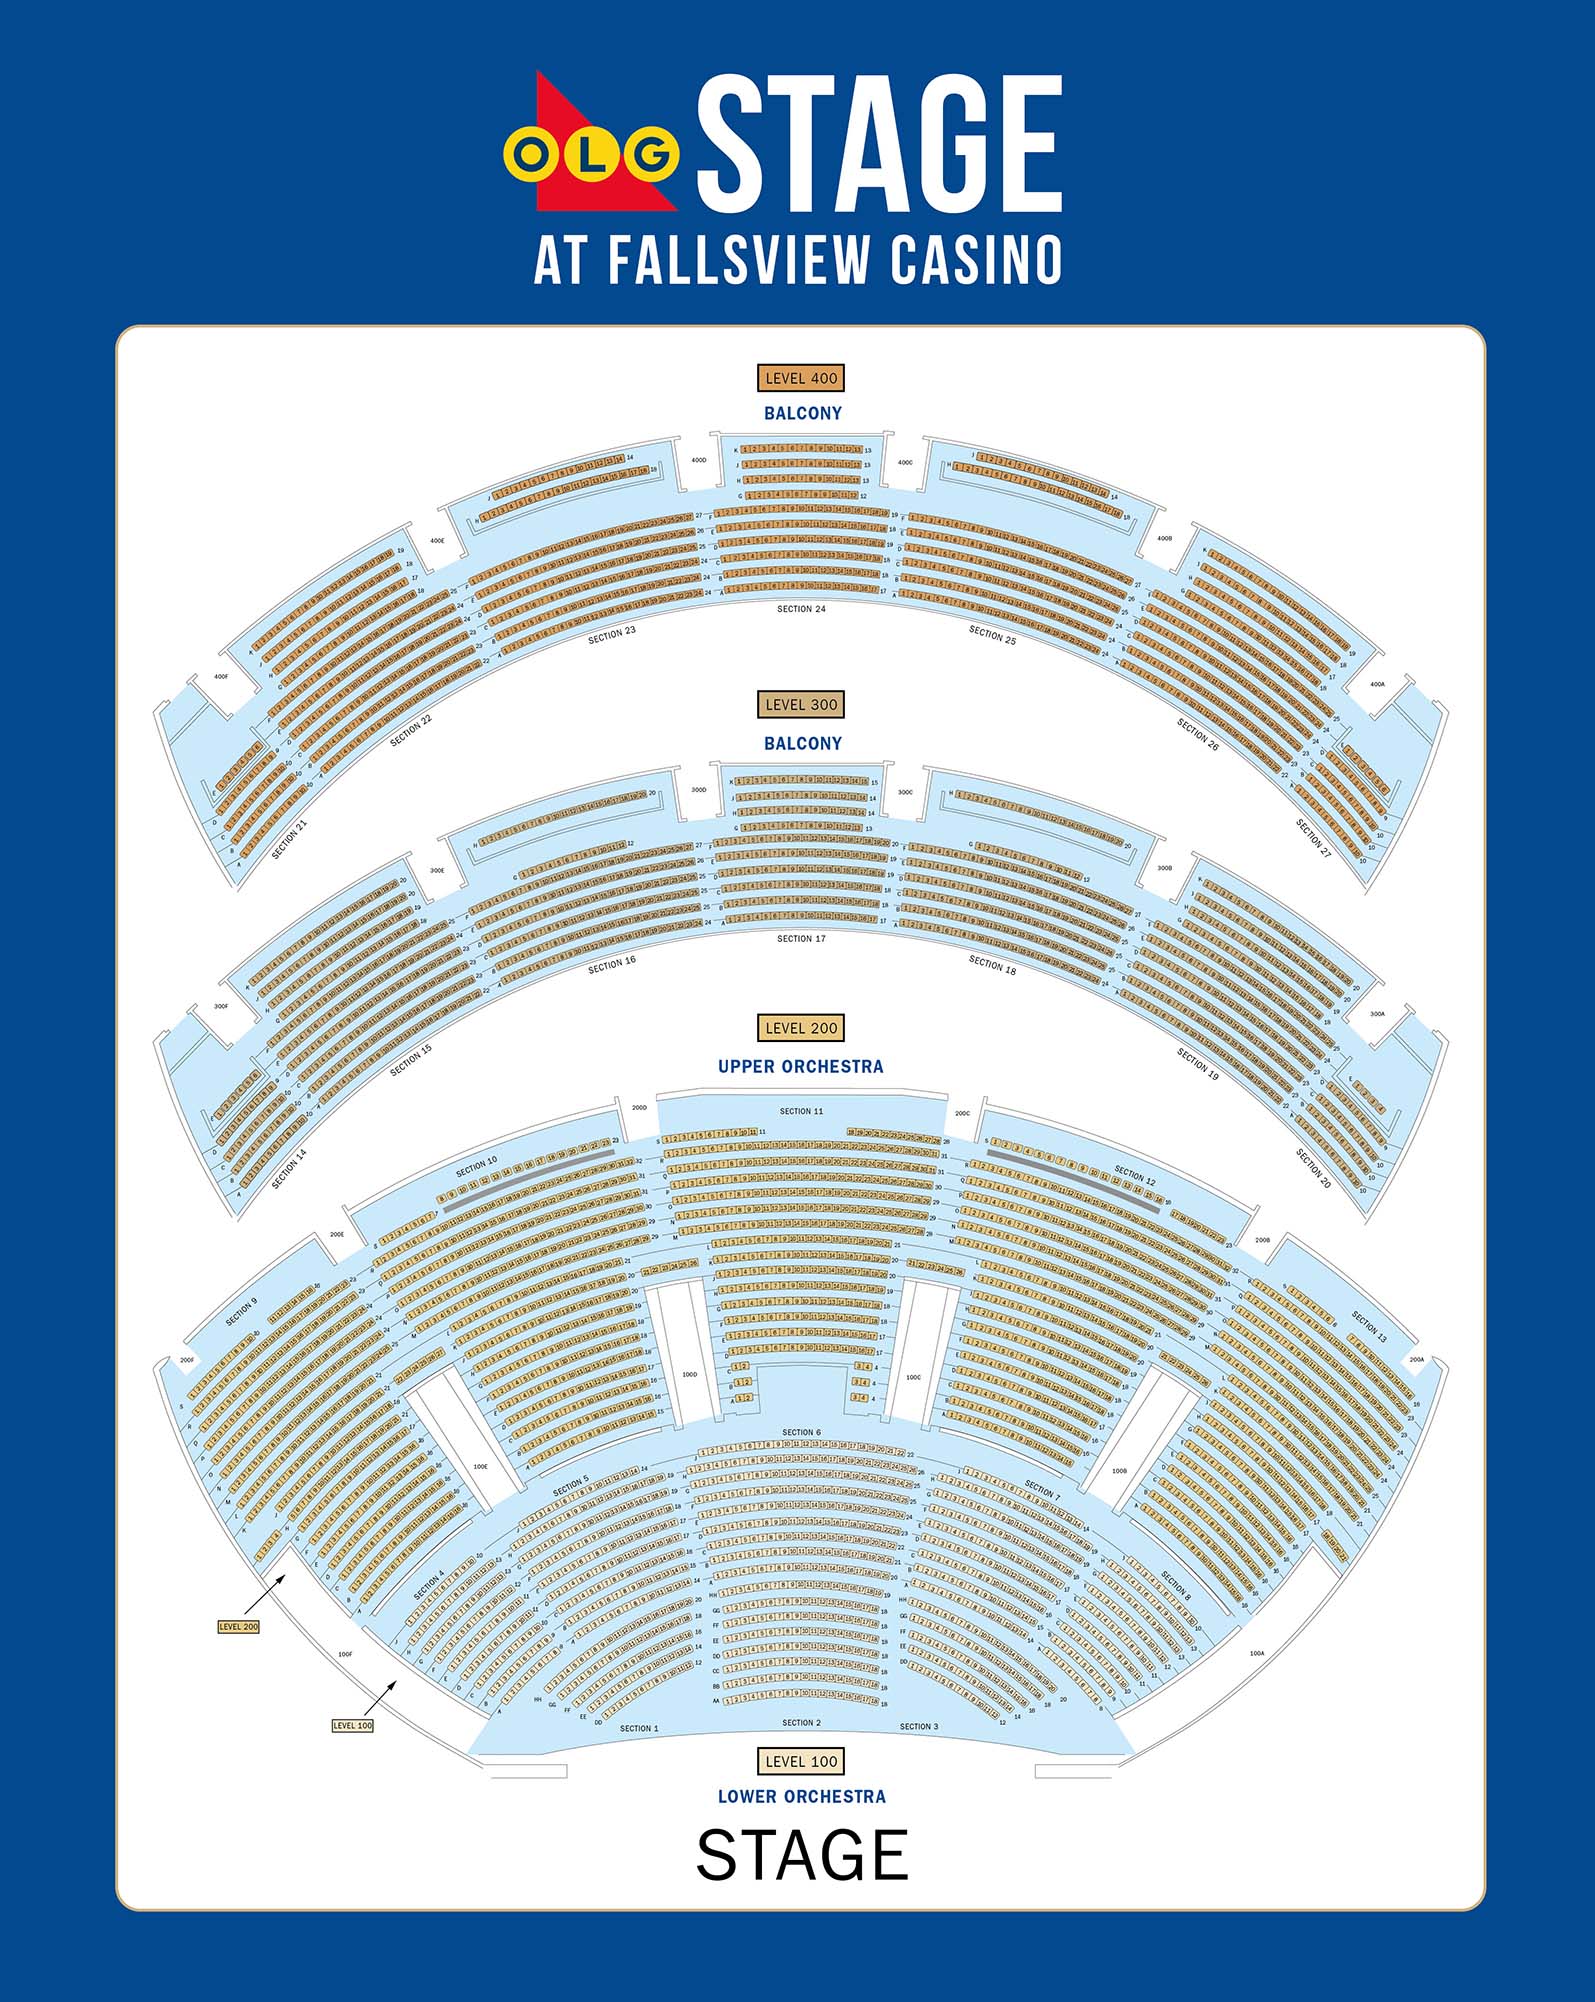 seating chart of OLG Stage at Fallsview Casino theatre